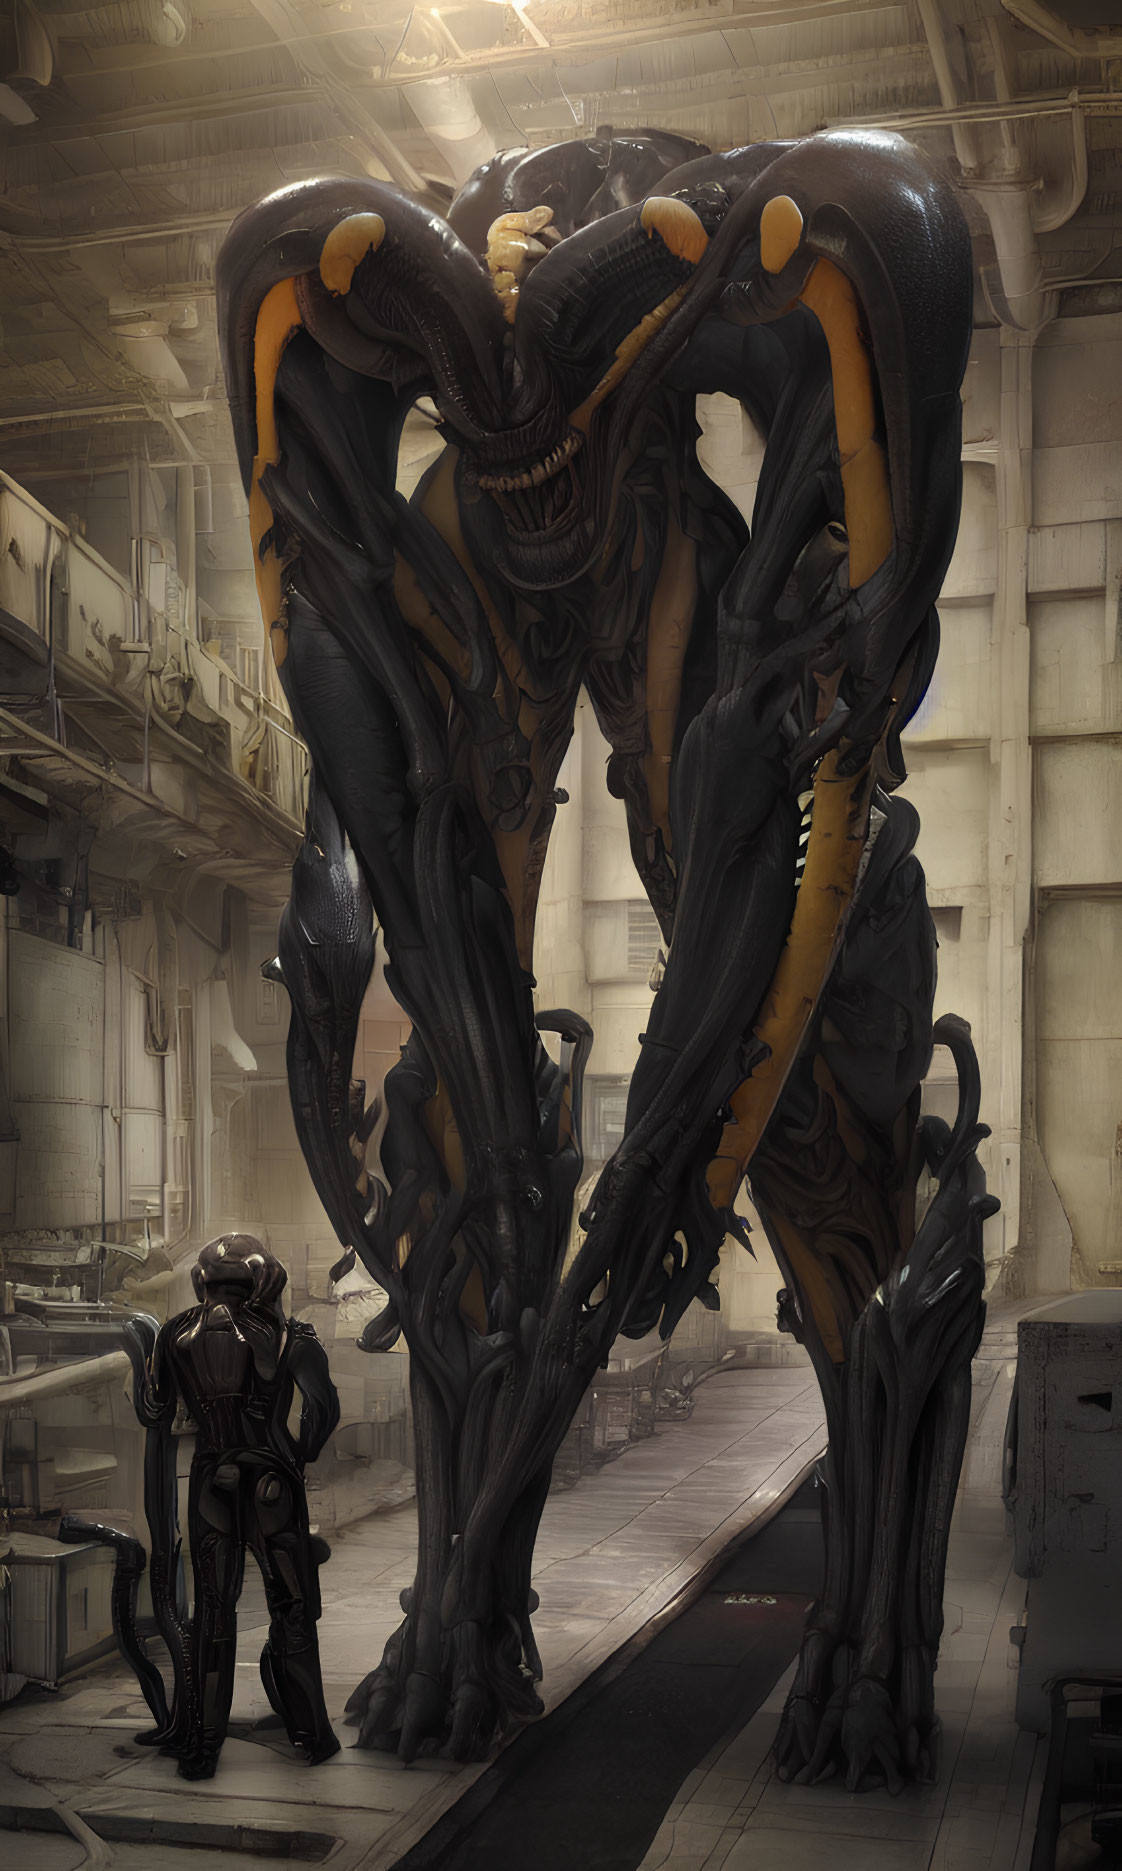 Giant alien creature with exoskeleton confronts figure in futuristic suit